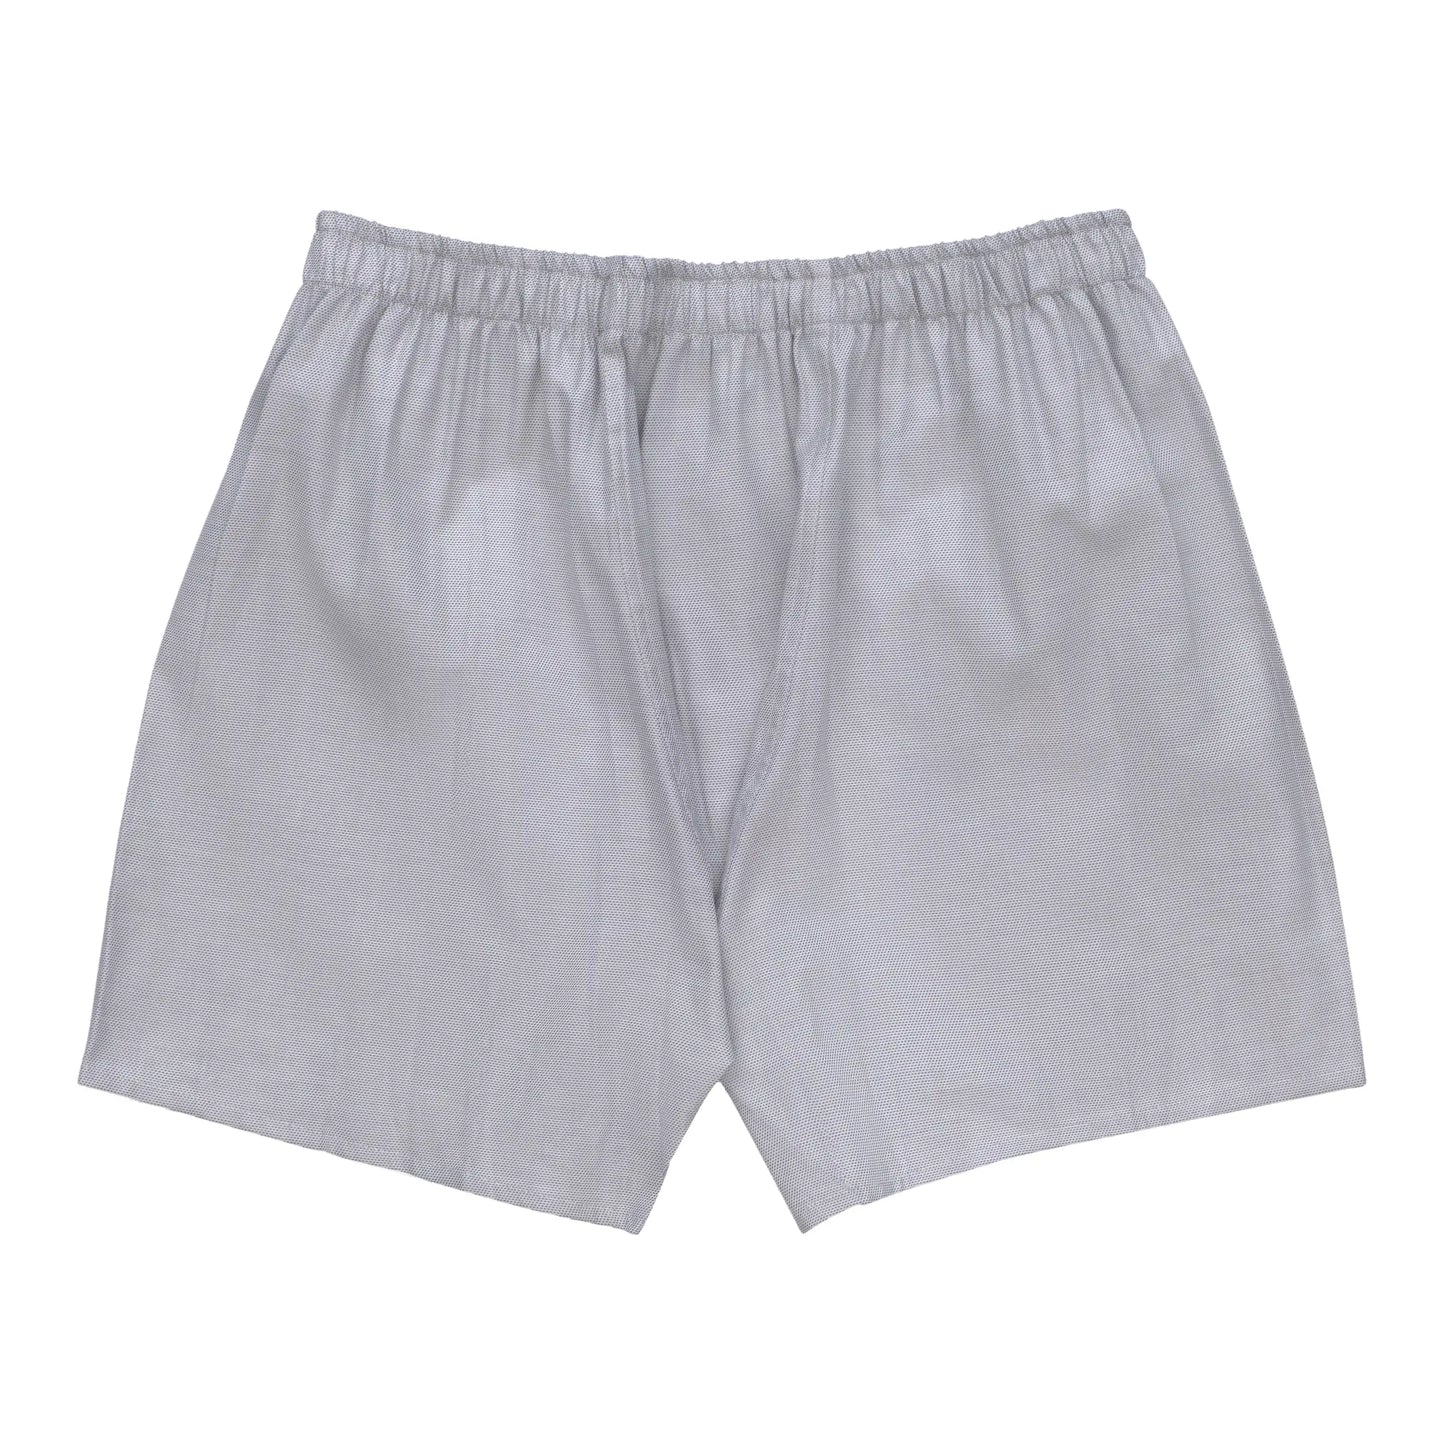 Fine-Checked Boxer Shorts in White and Blue